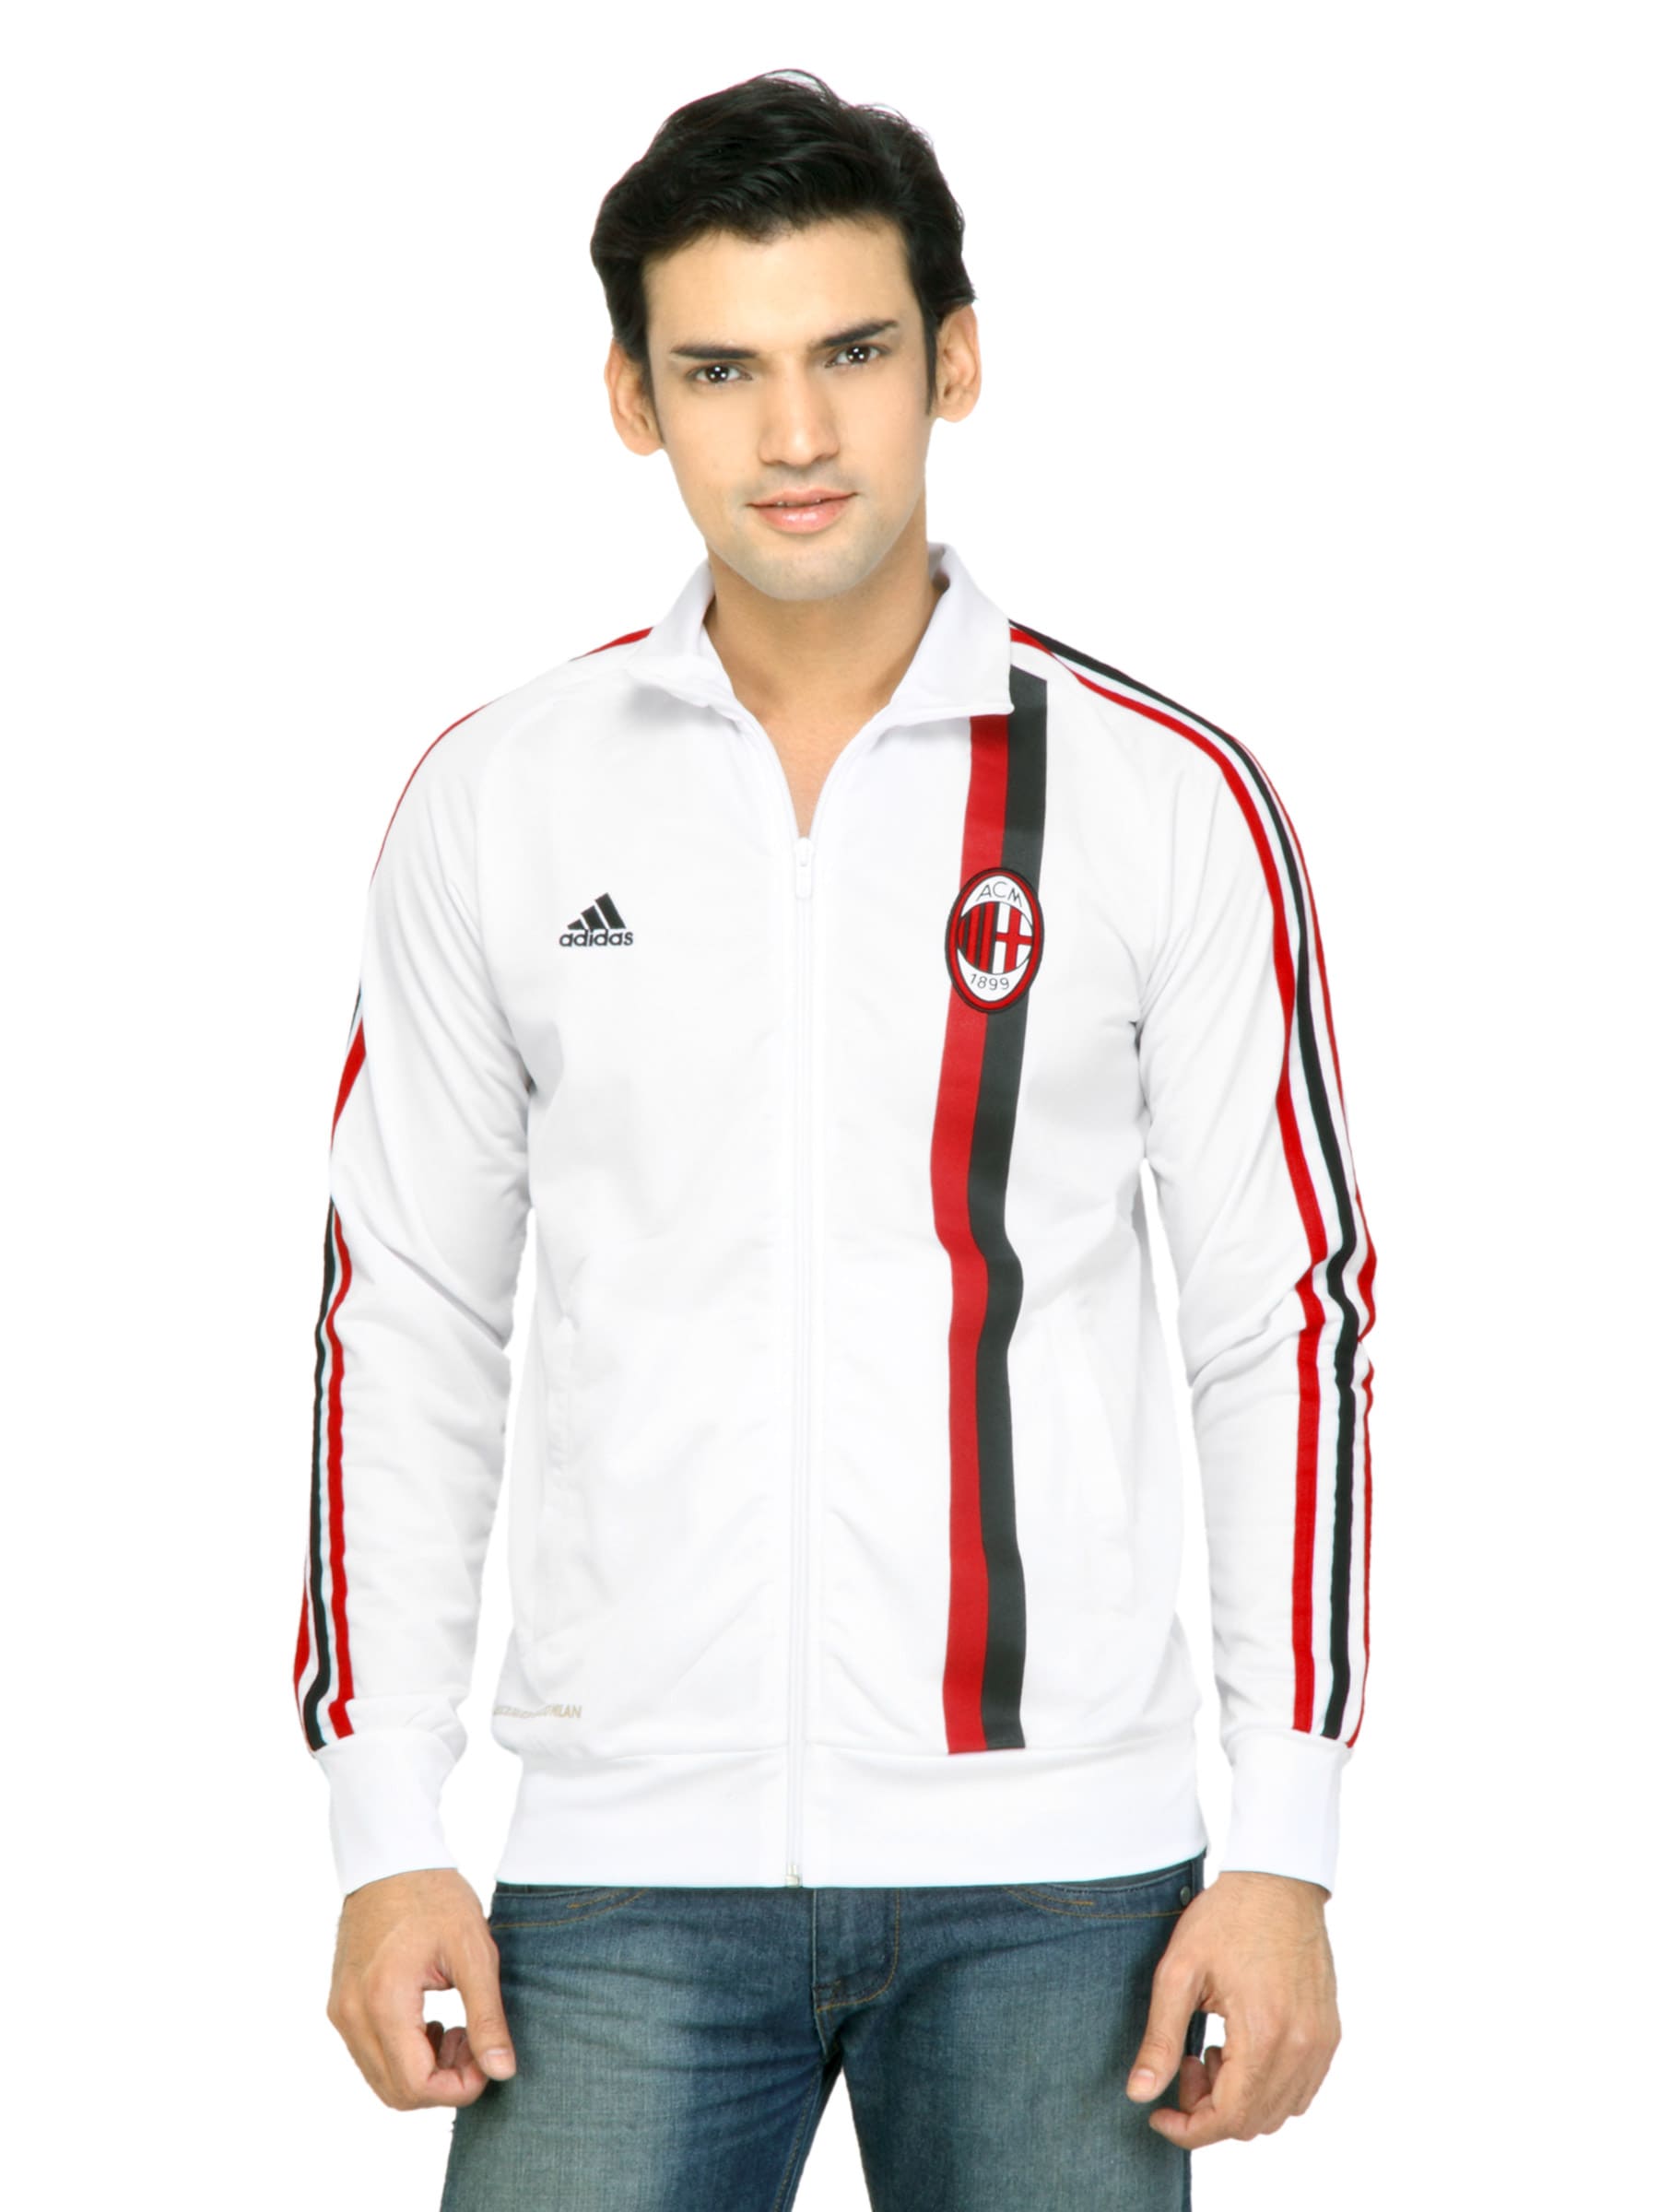 ADIDAS Men Solid White Jackets